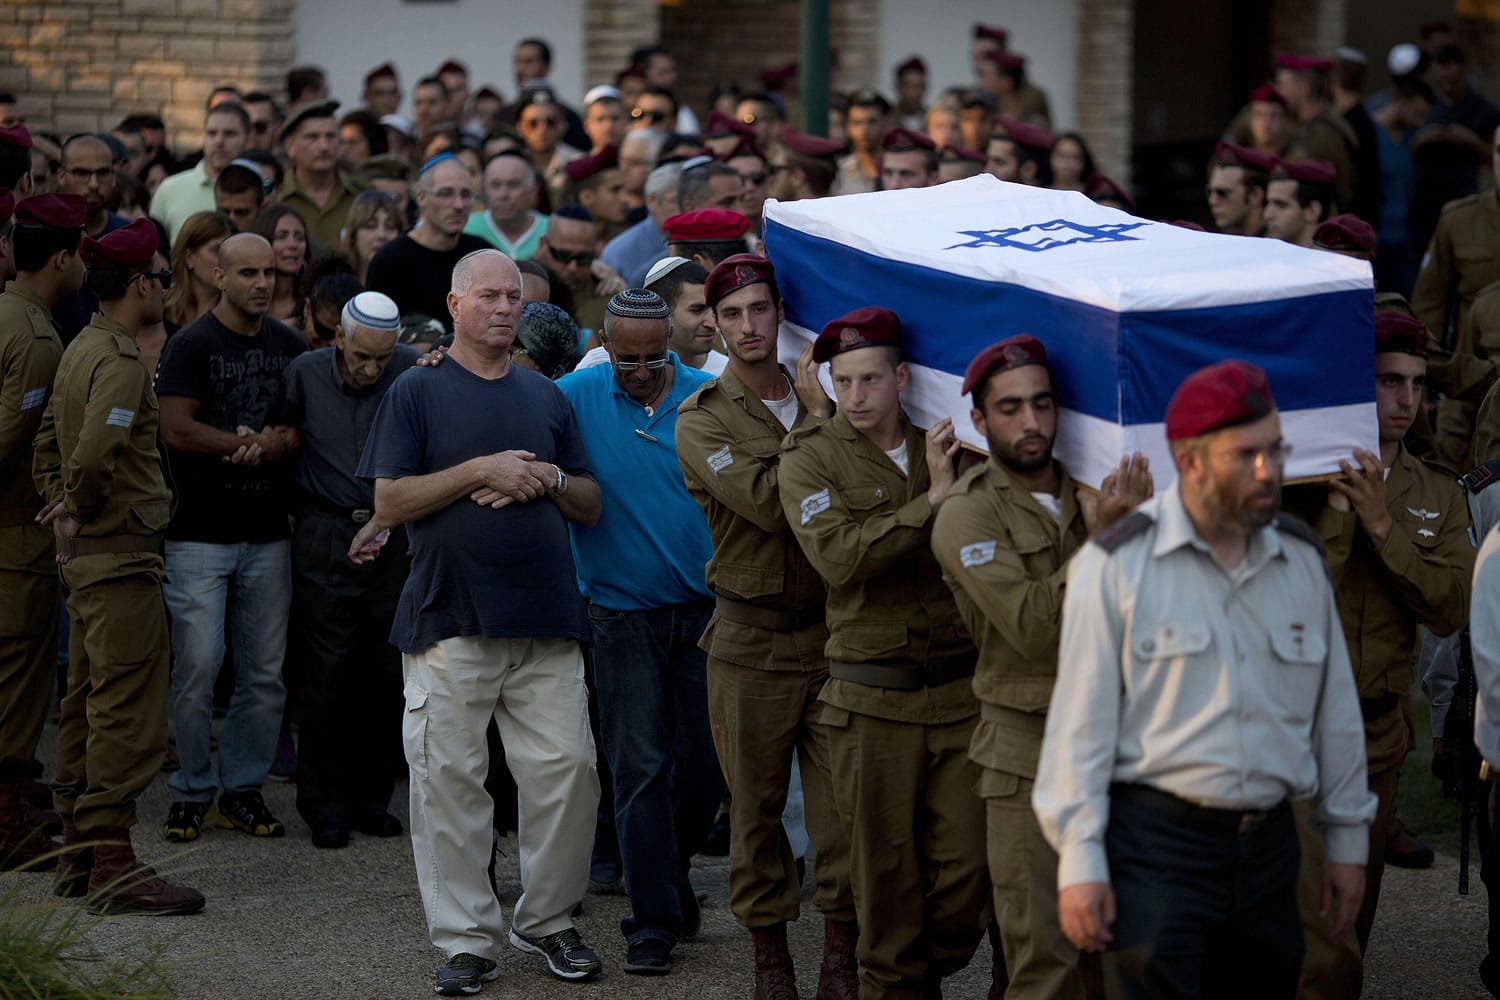 Israeli soldiers carry the coffin Sgt. Bnaya Rubel during his funeral Sunday at the military cemetery in Holon, Israel.